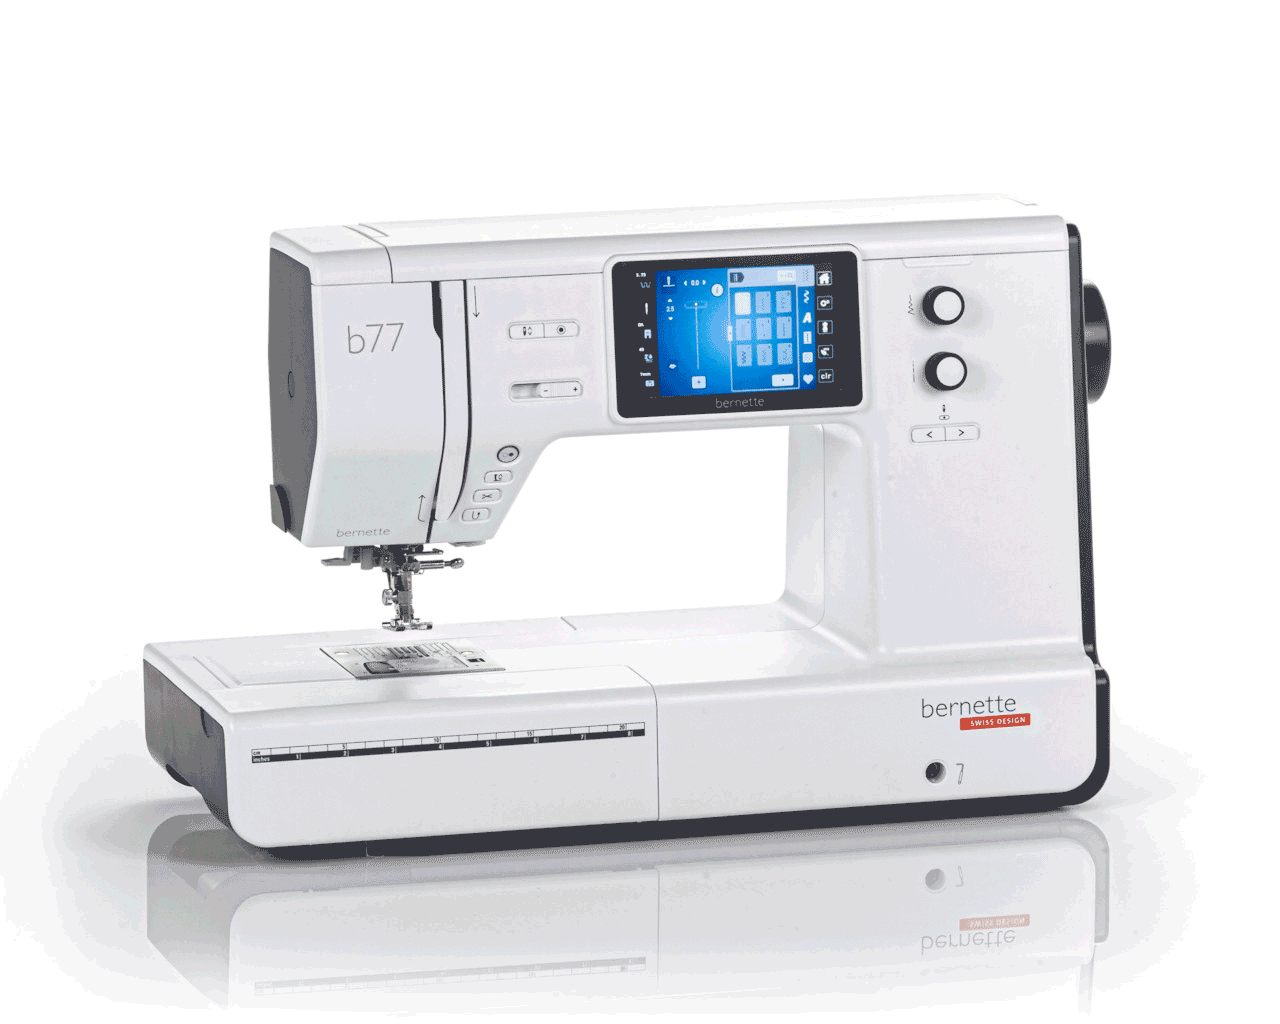 Bernette b77 Sewing and Quilting Machine for Sale at World Weidner